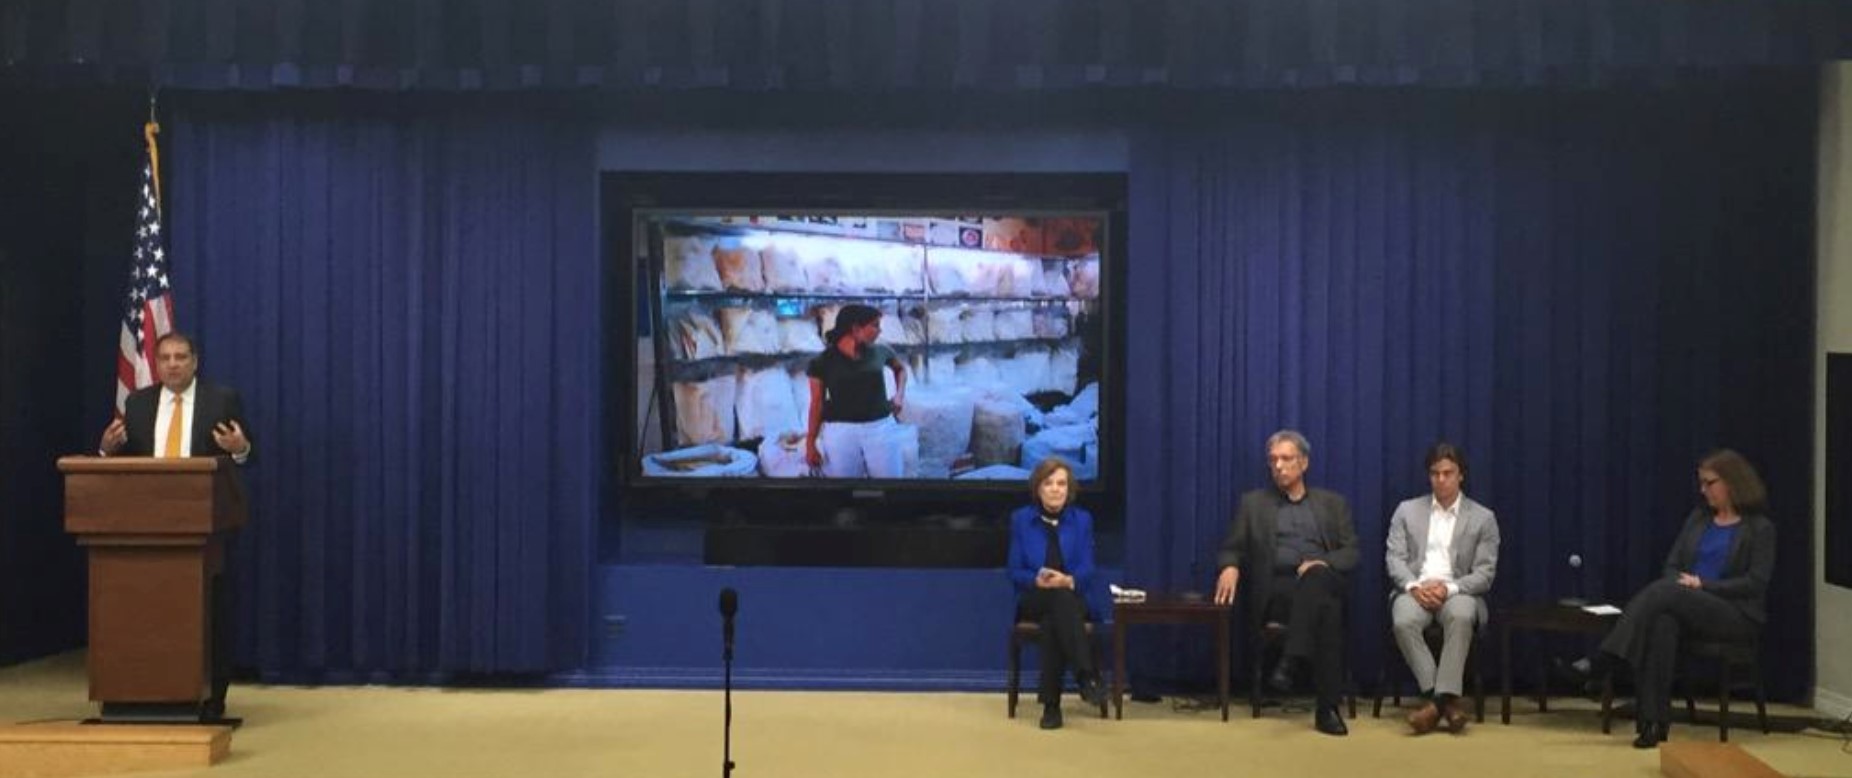 Dr. Daniel Pauly at a White House event on citizen science.